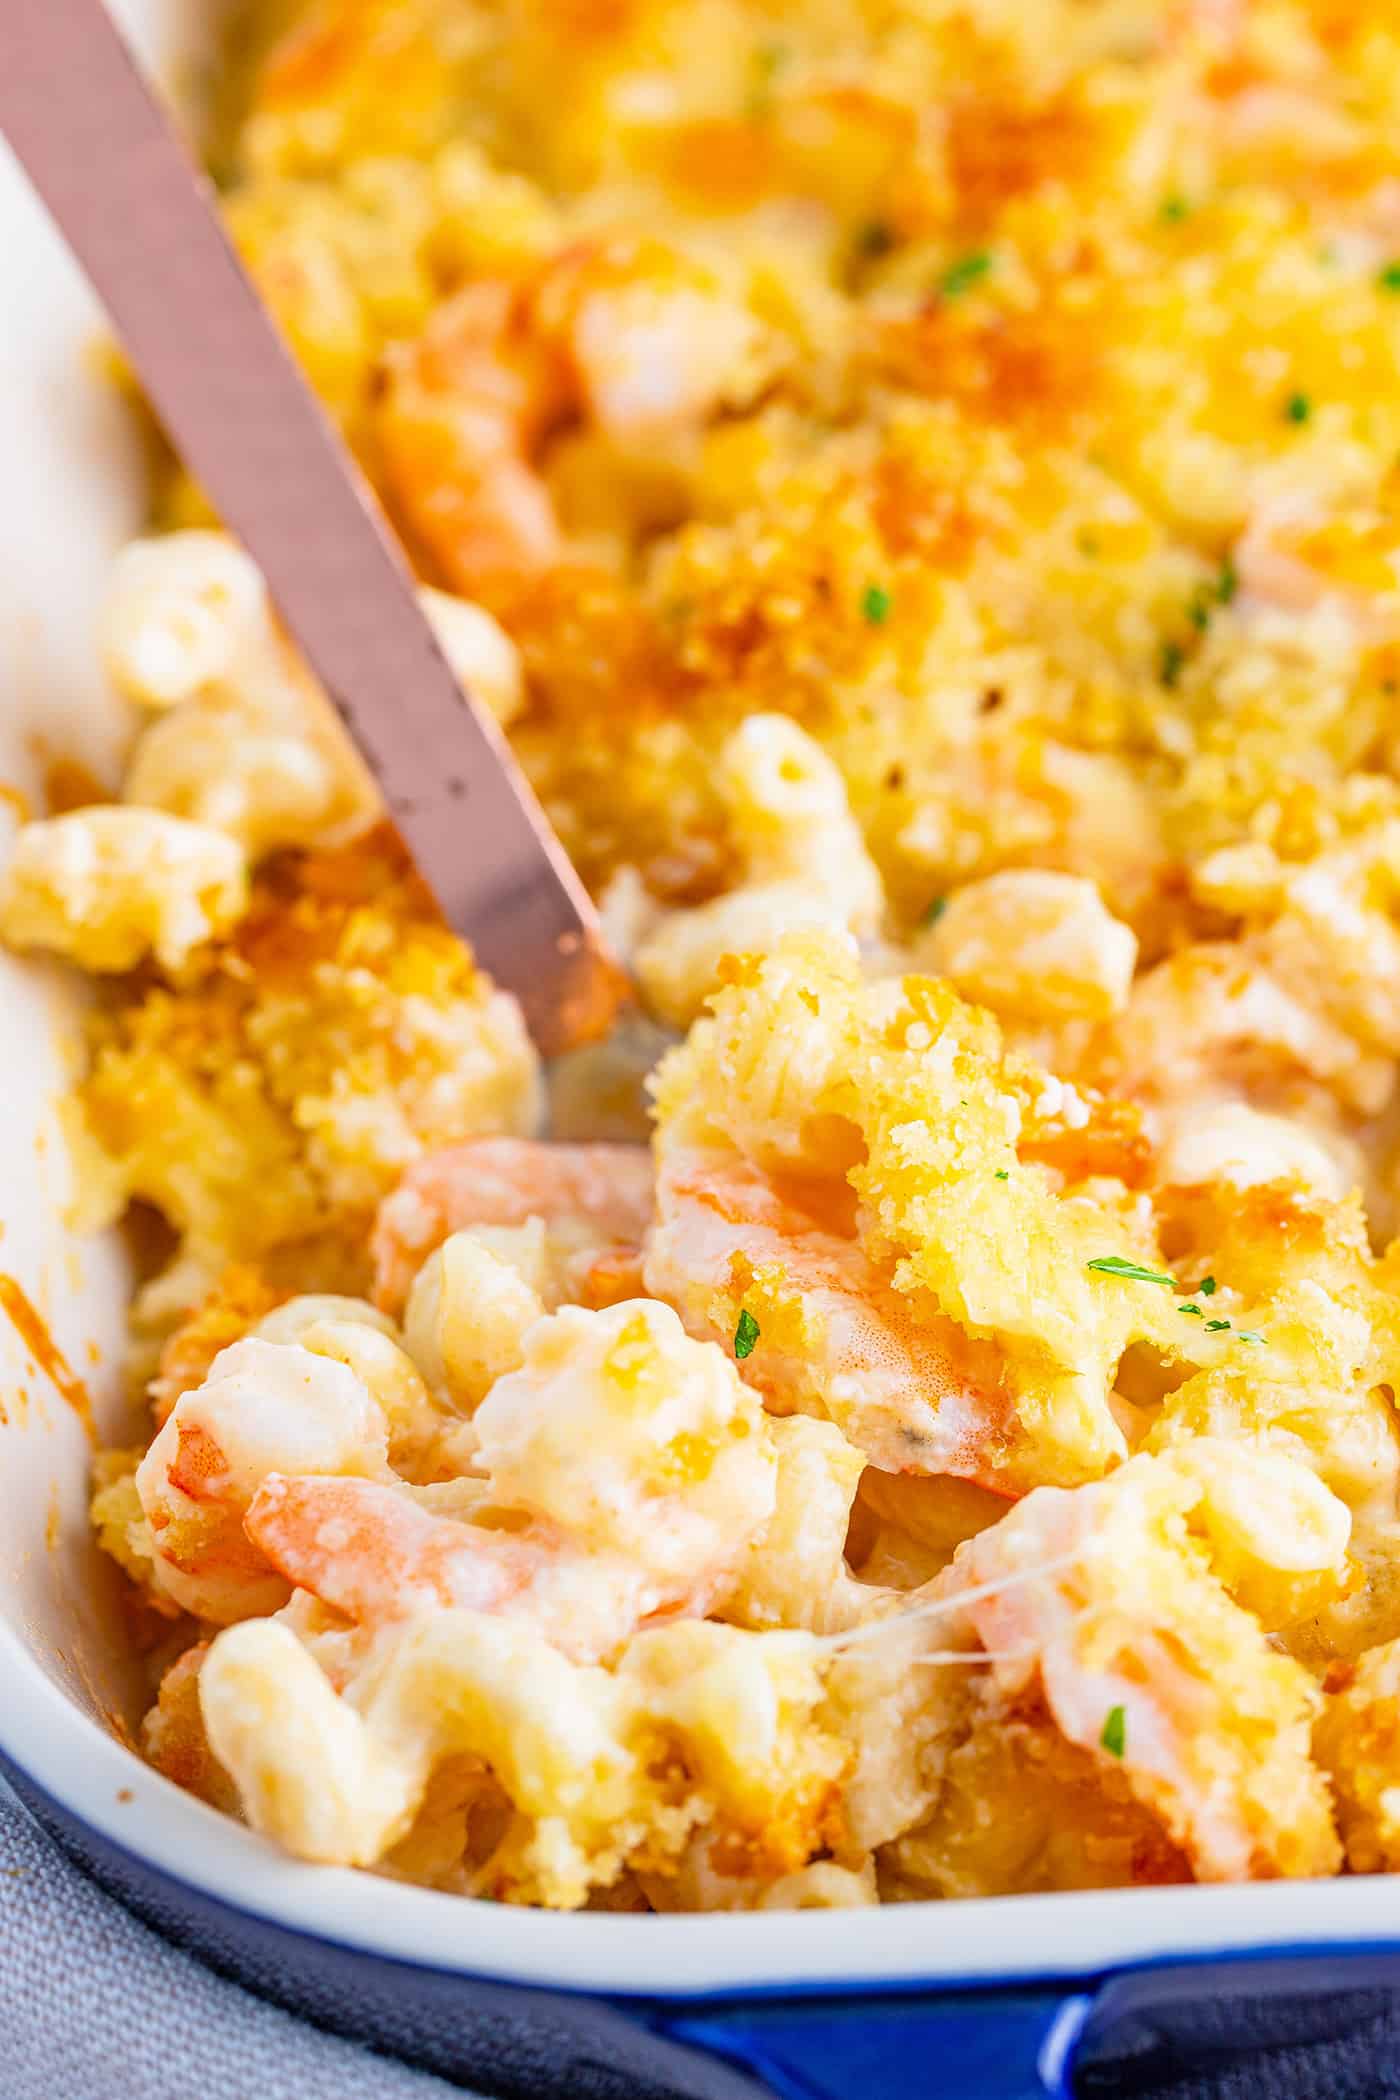 a spoon digging into baked mac & cheese, showing the shrimp inside